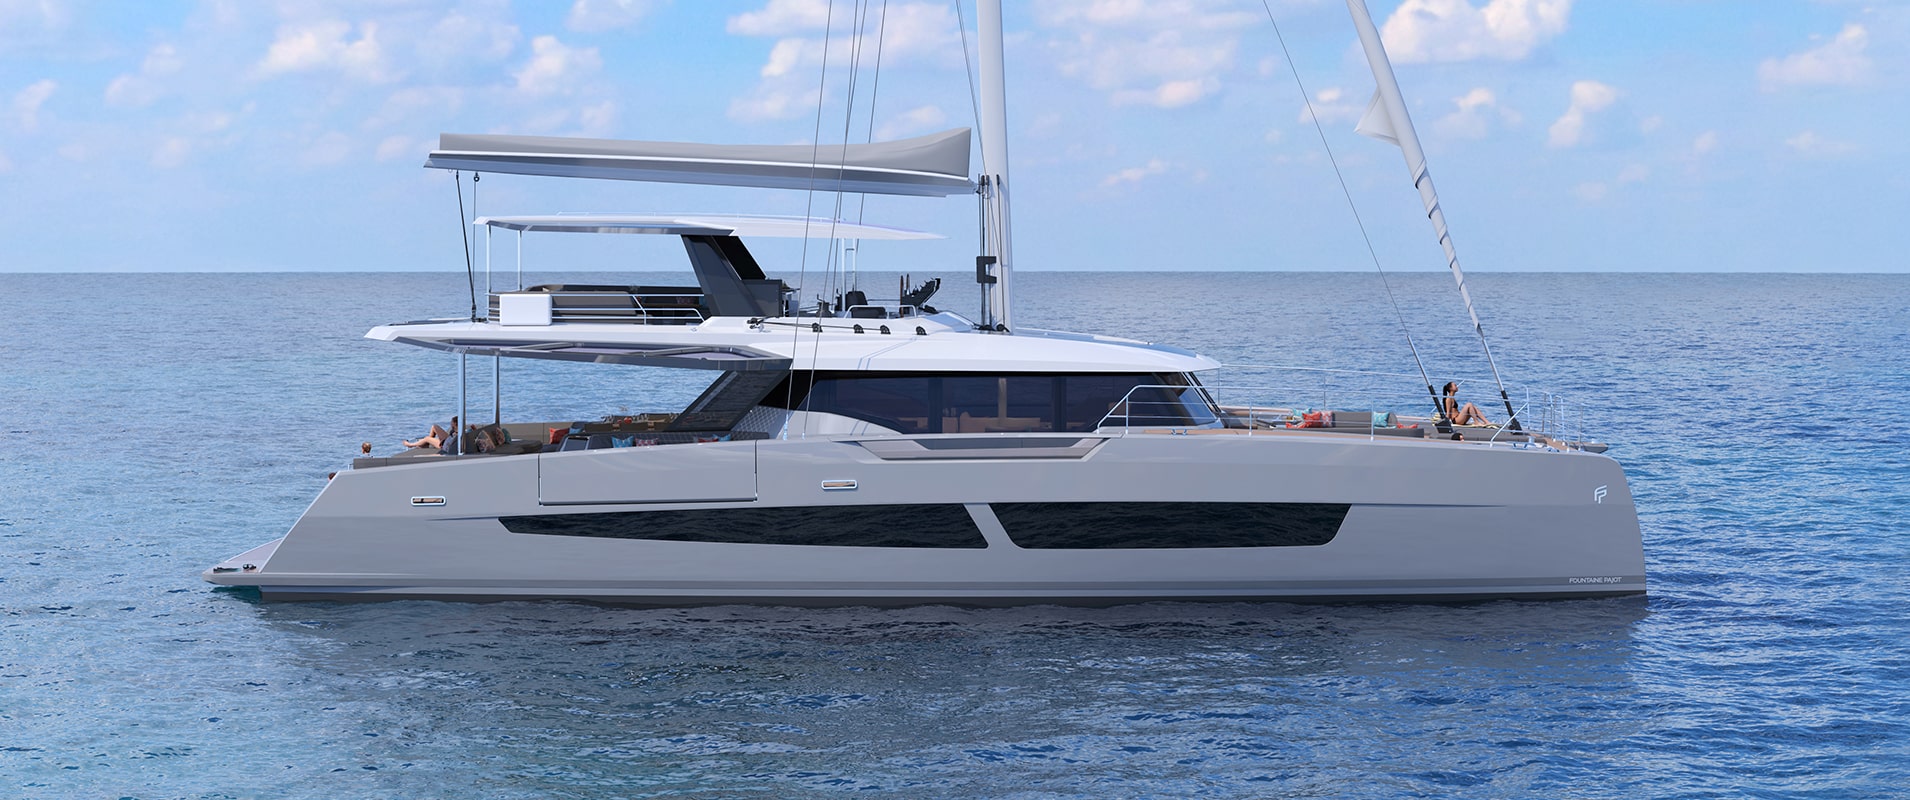 Just arrived in Greece: 2nd Fountaine Pajot Thira 80!